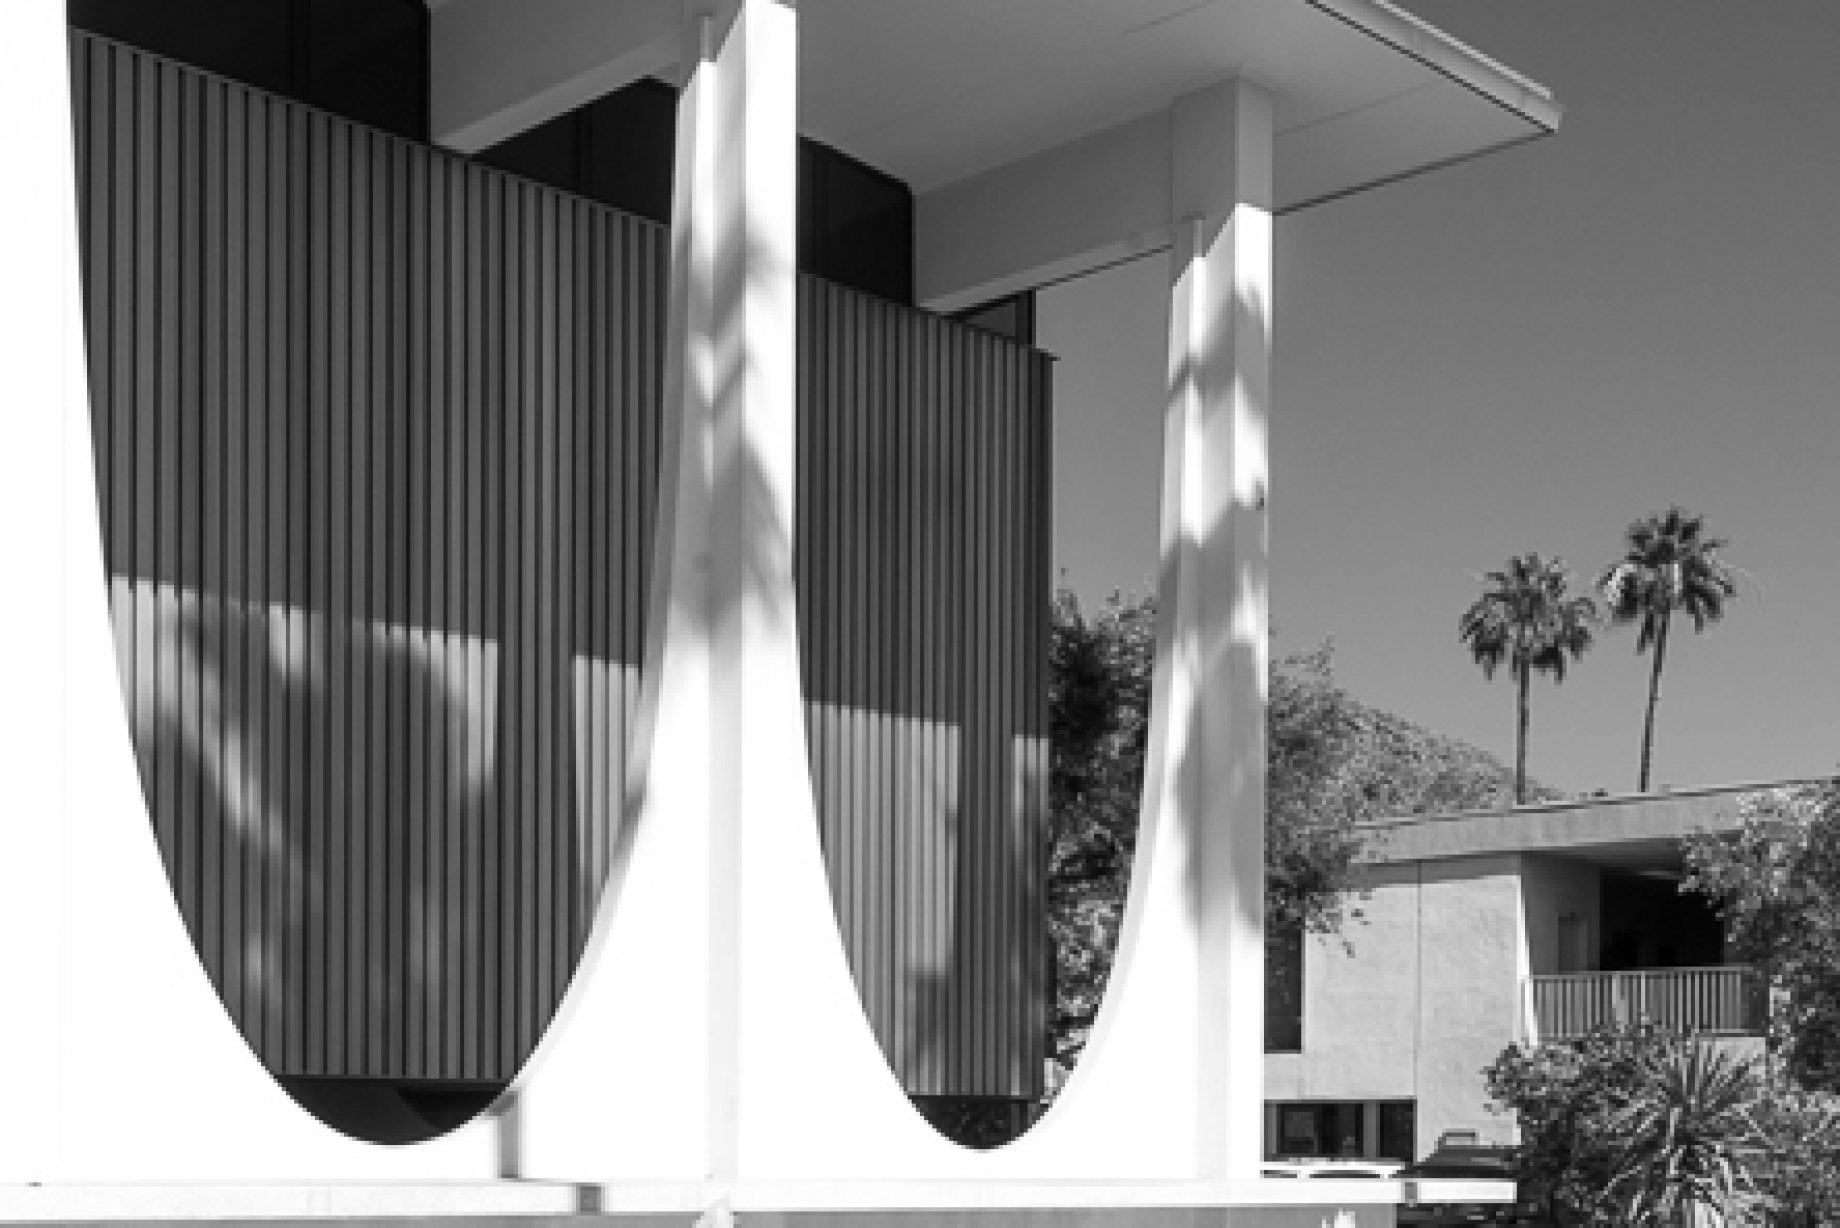 Washington Mutual bank building - downtown Palm Springs was designed by Harry Williams - architectural photography